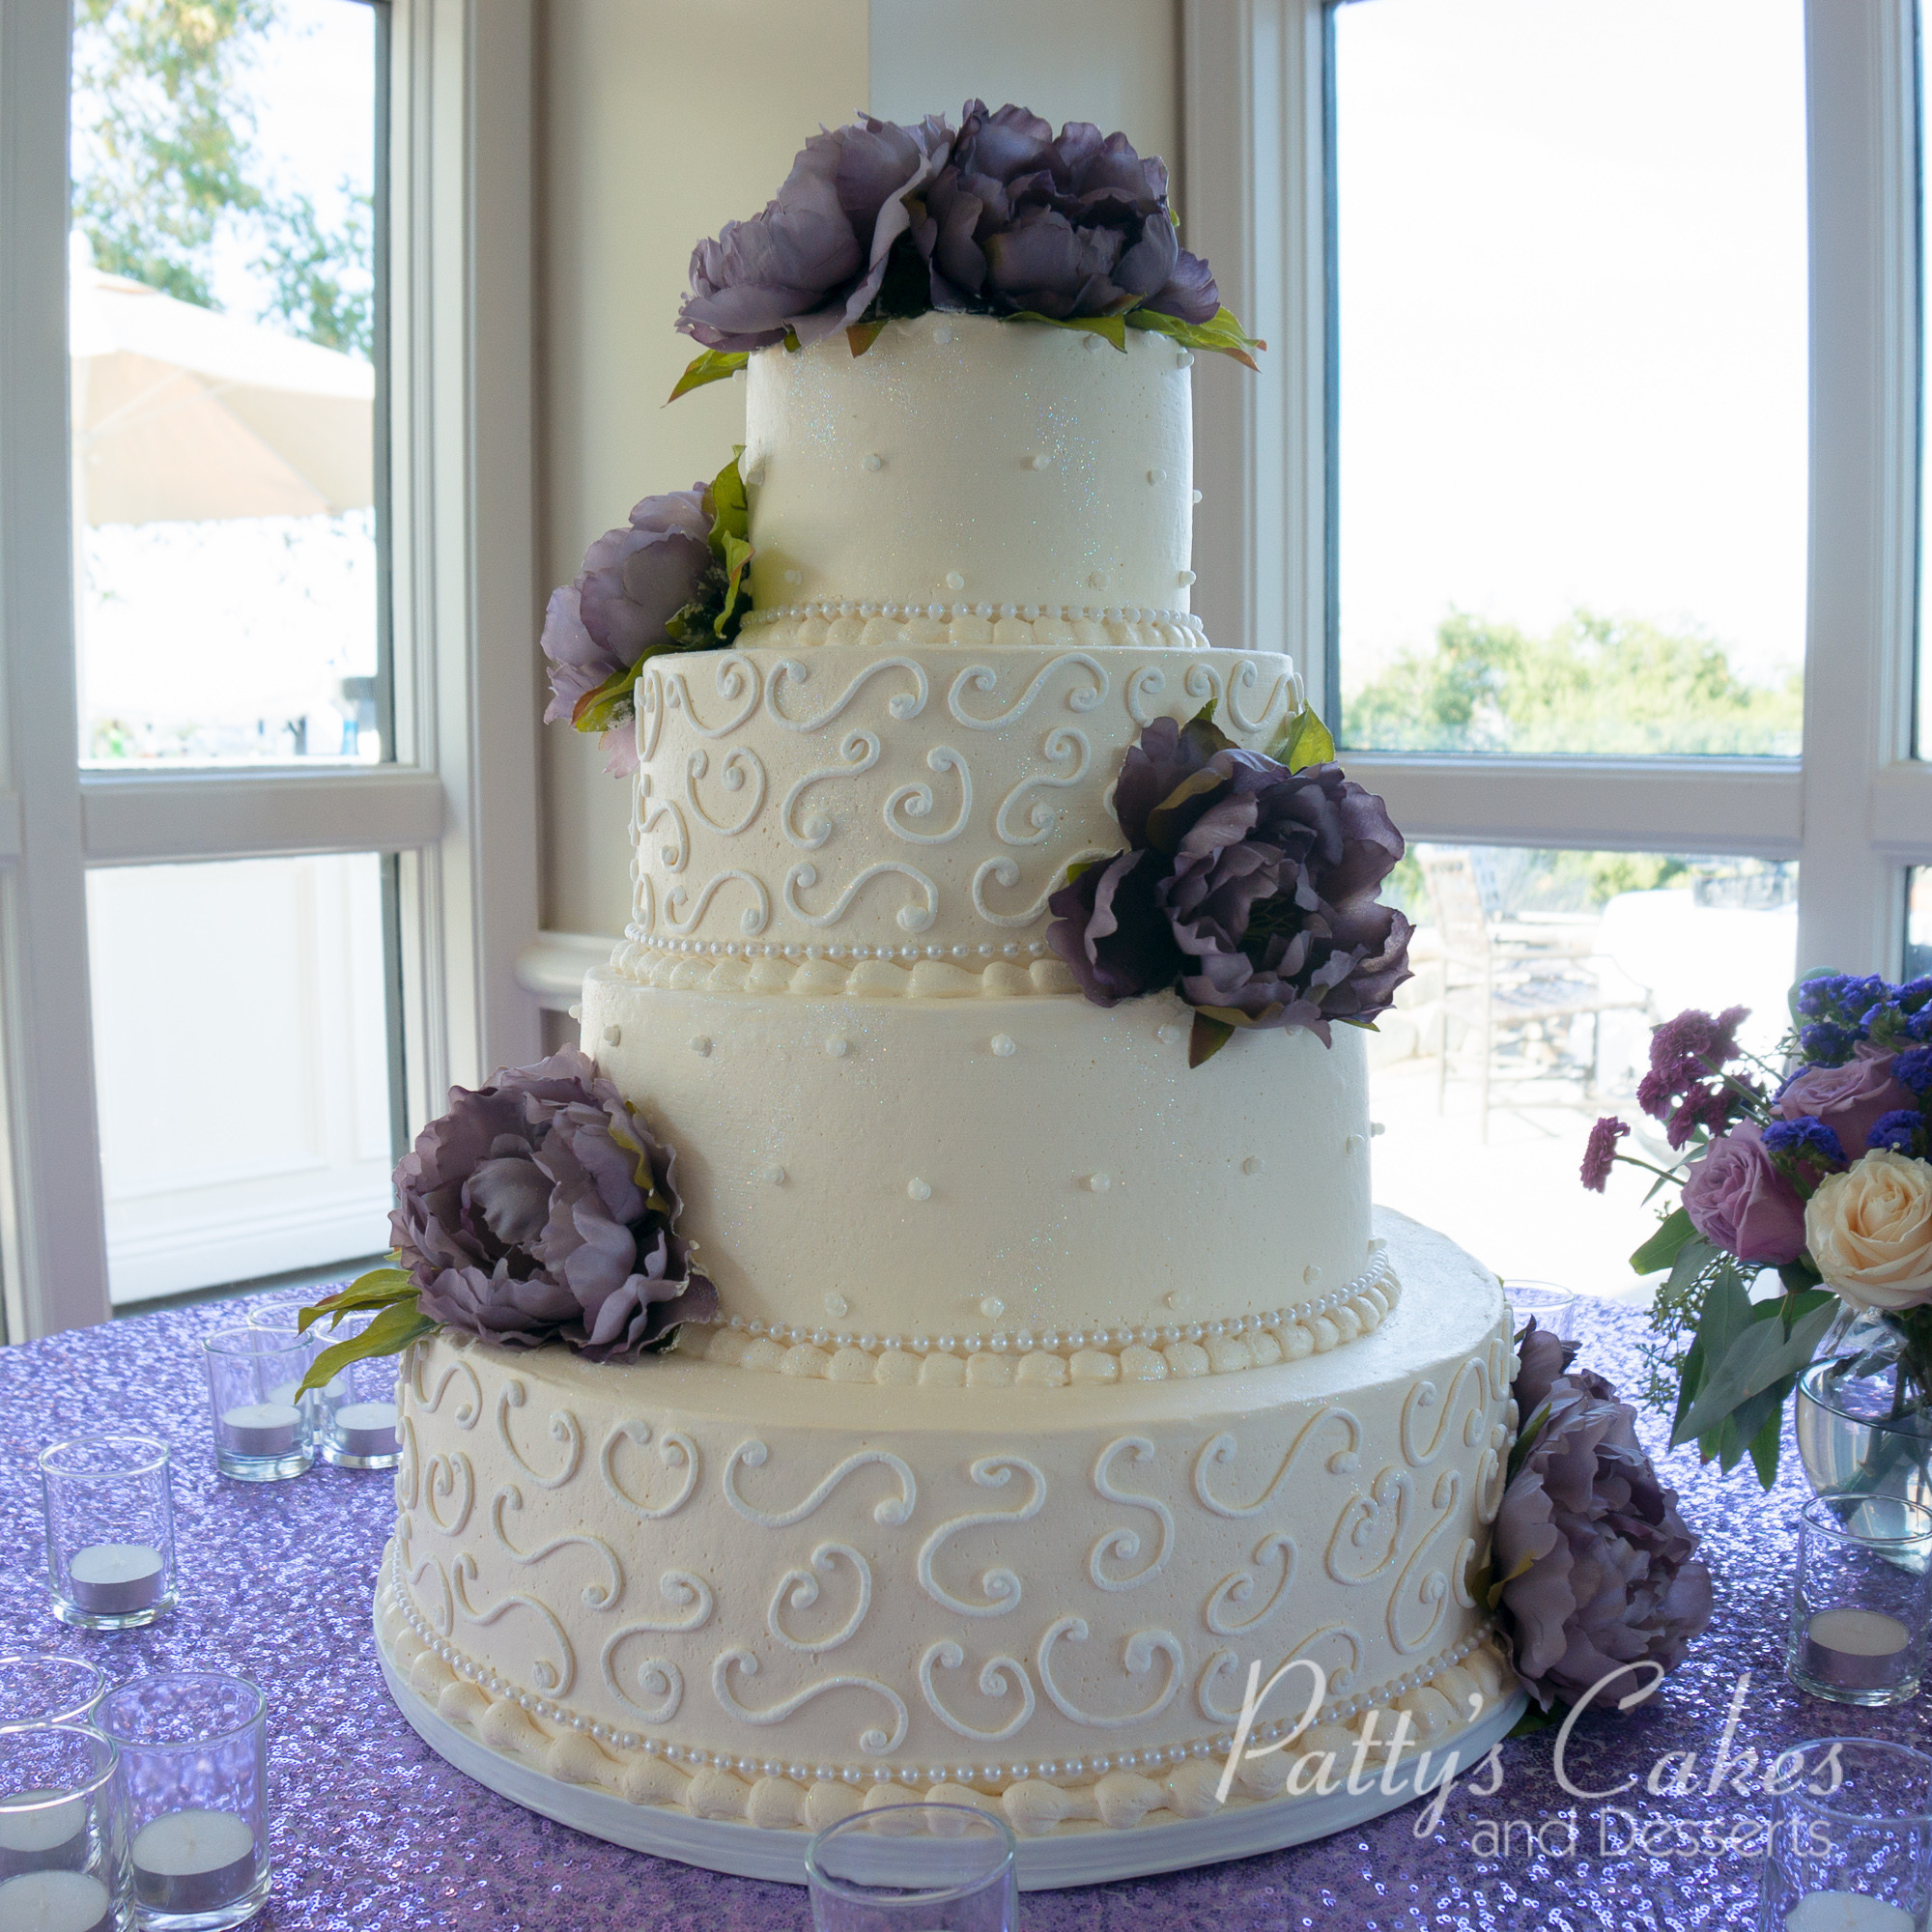 4 Tier Wedding Cakes
 of a classic 4 tier wedding cake Patty s Cakes and